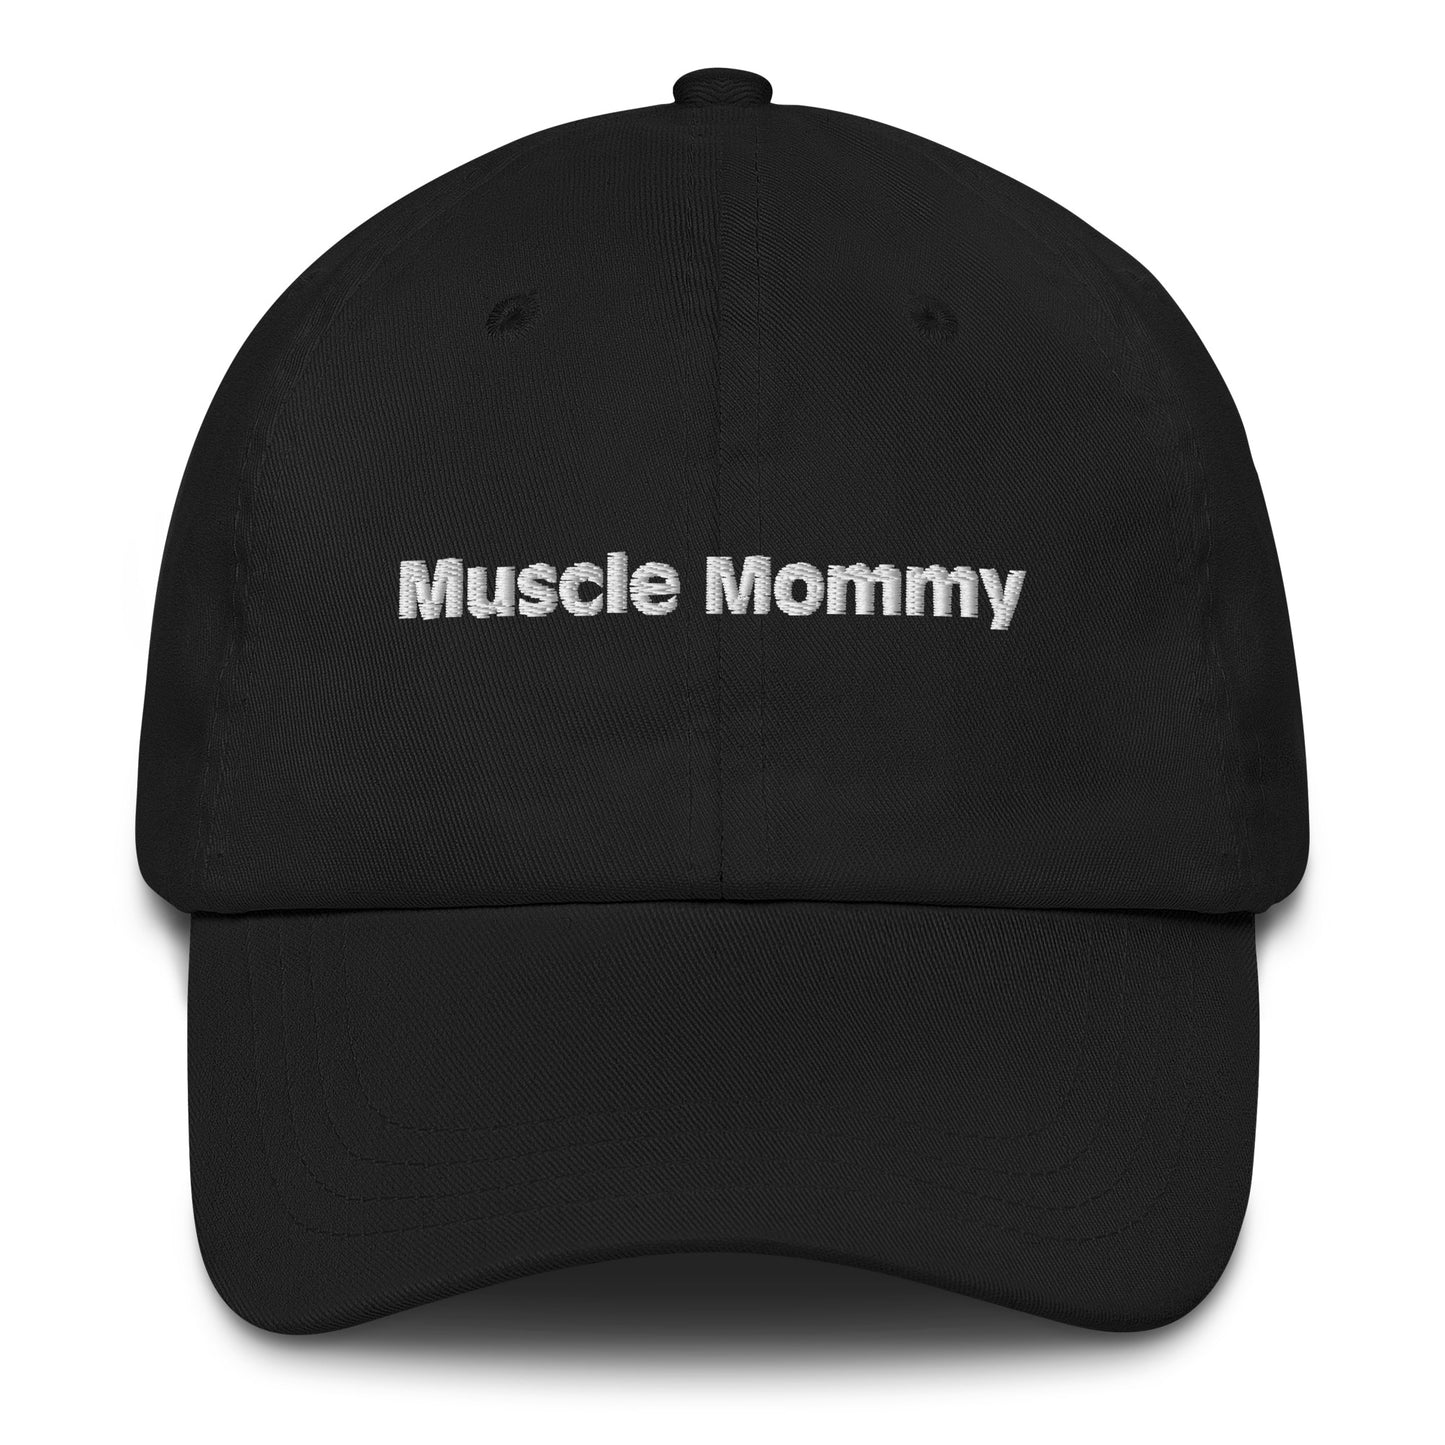 Muscle Mommy Hat, Muscle Mami Vintage Hat, Muscle Mommy Hat, Cute Baseball Hat, Women's Baseball Cap, Cute Hat, Cute Hats for Women, Trucker Hats for Women